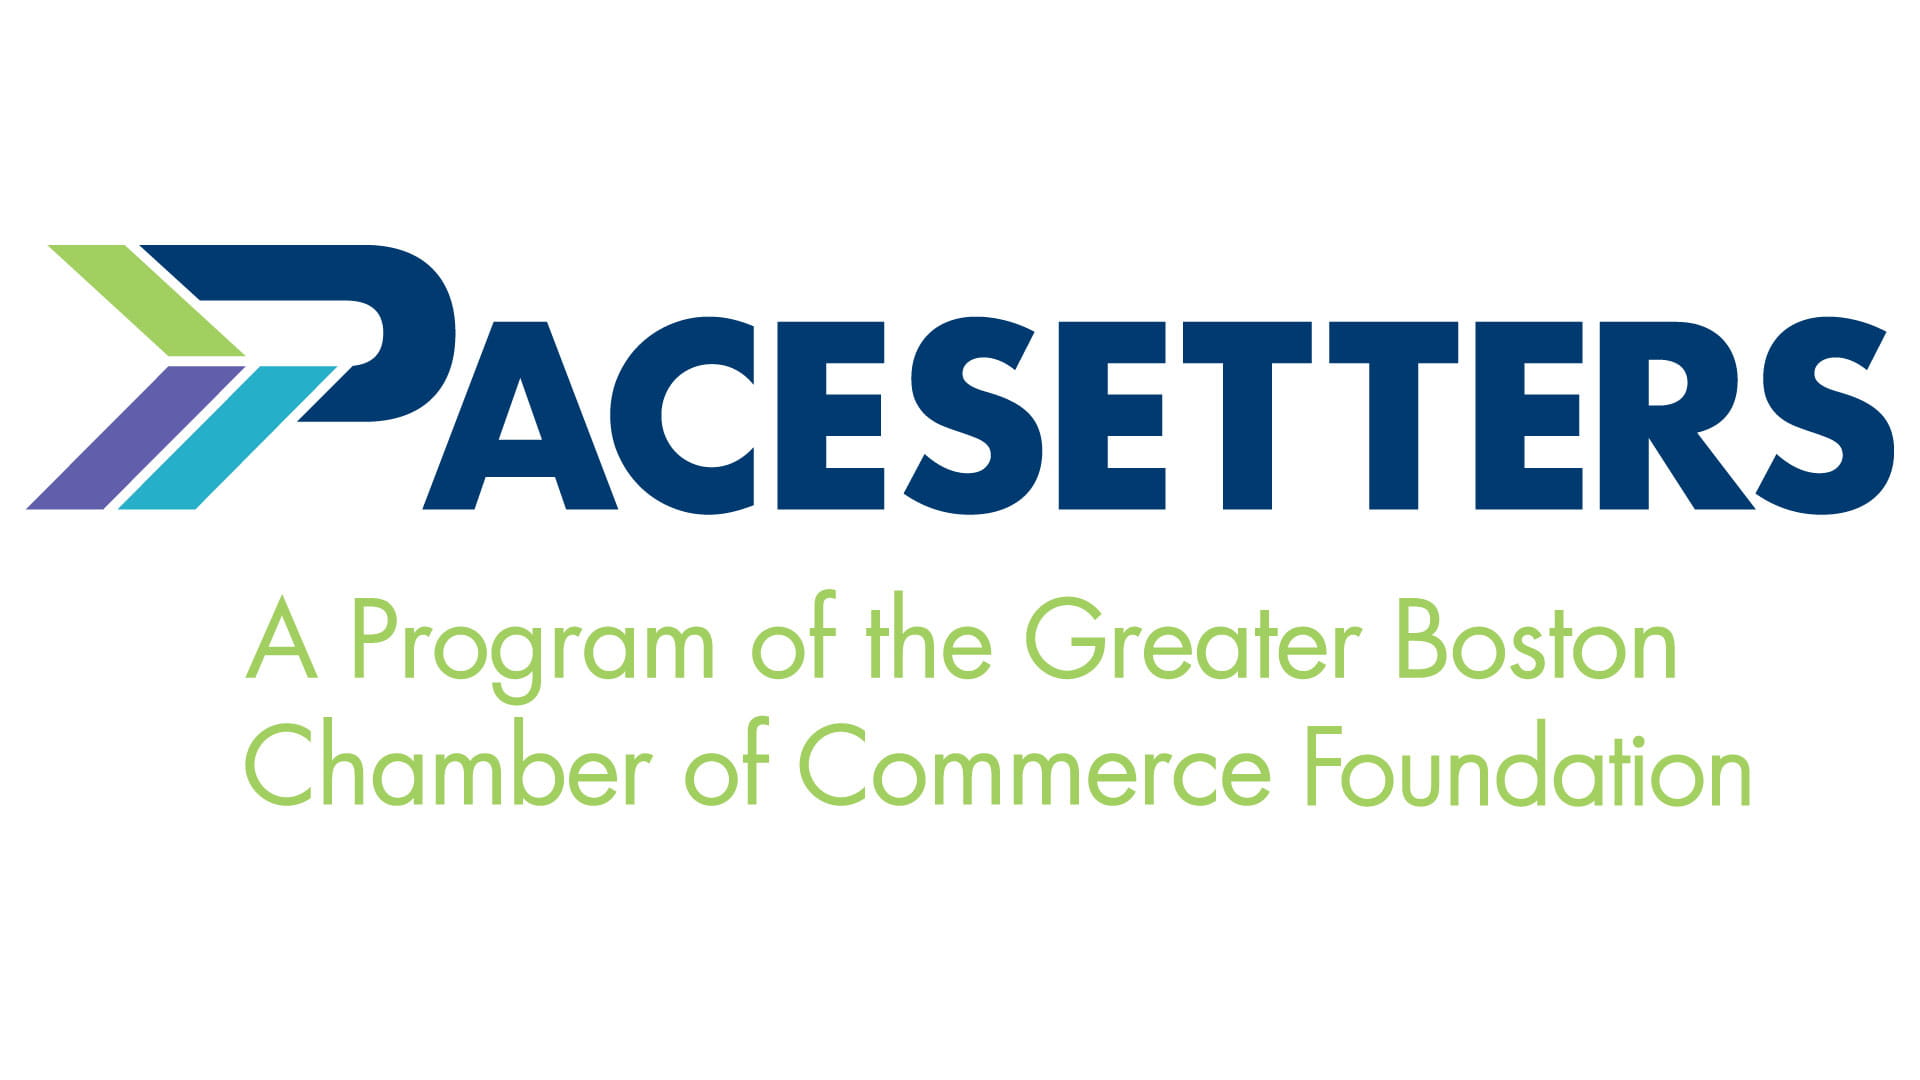 Pacesetters logo